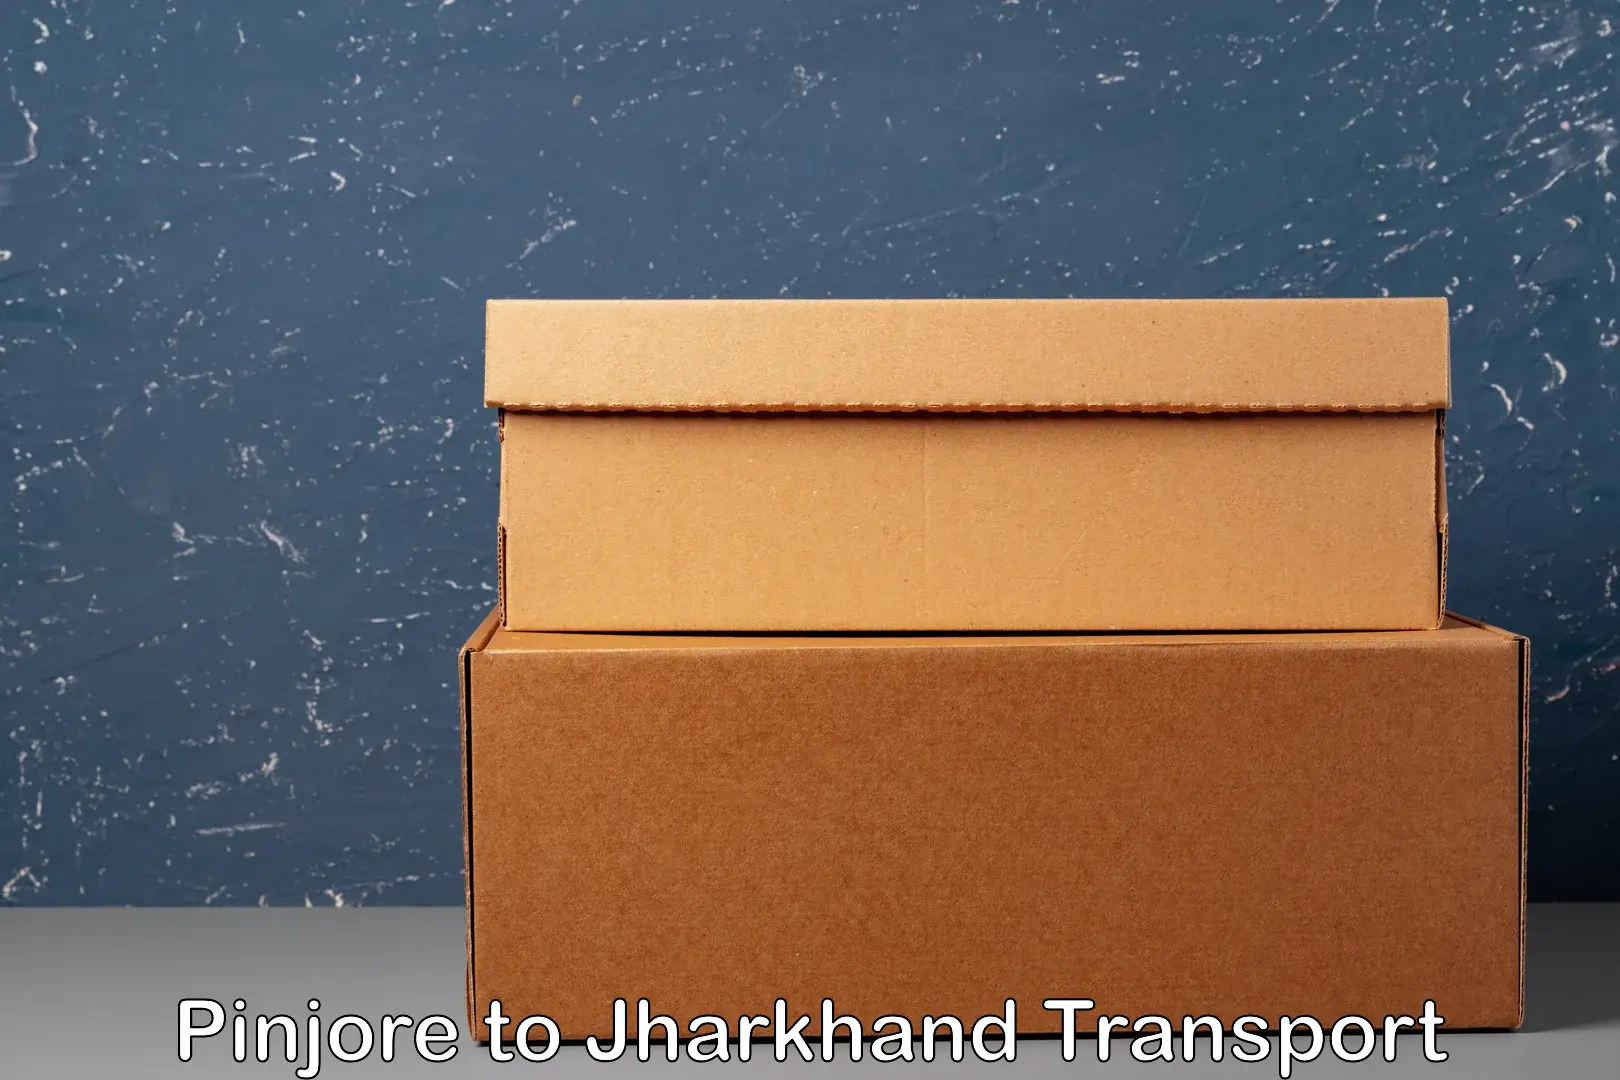 Air cargo transport services Pinjore to Jharkhand